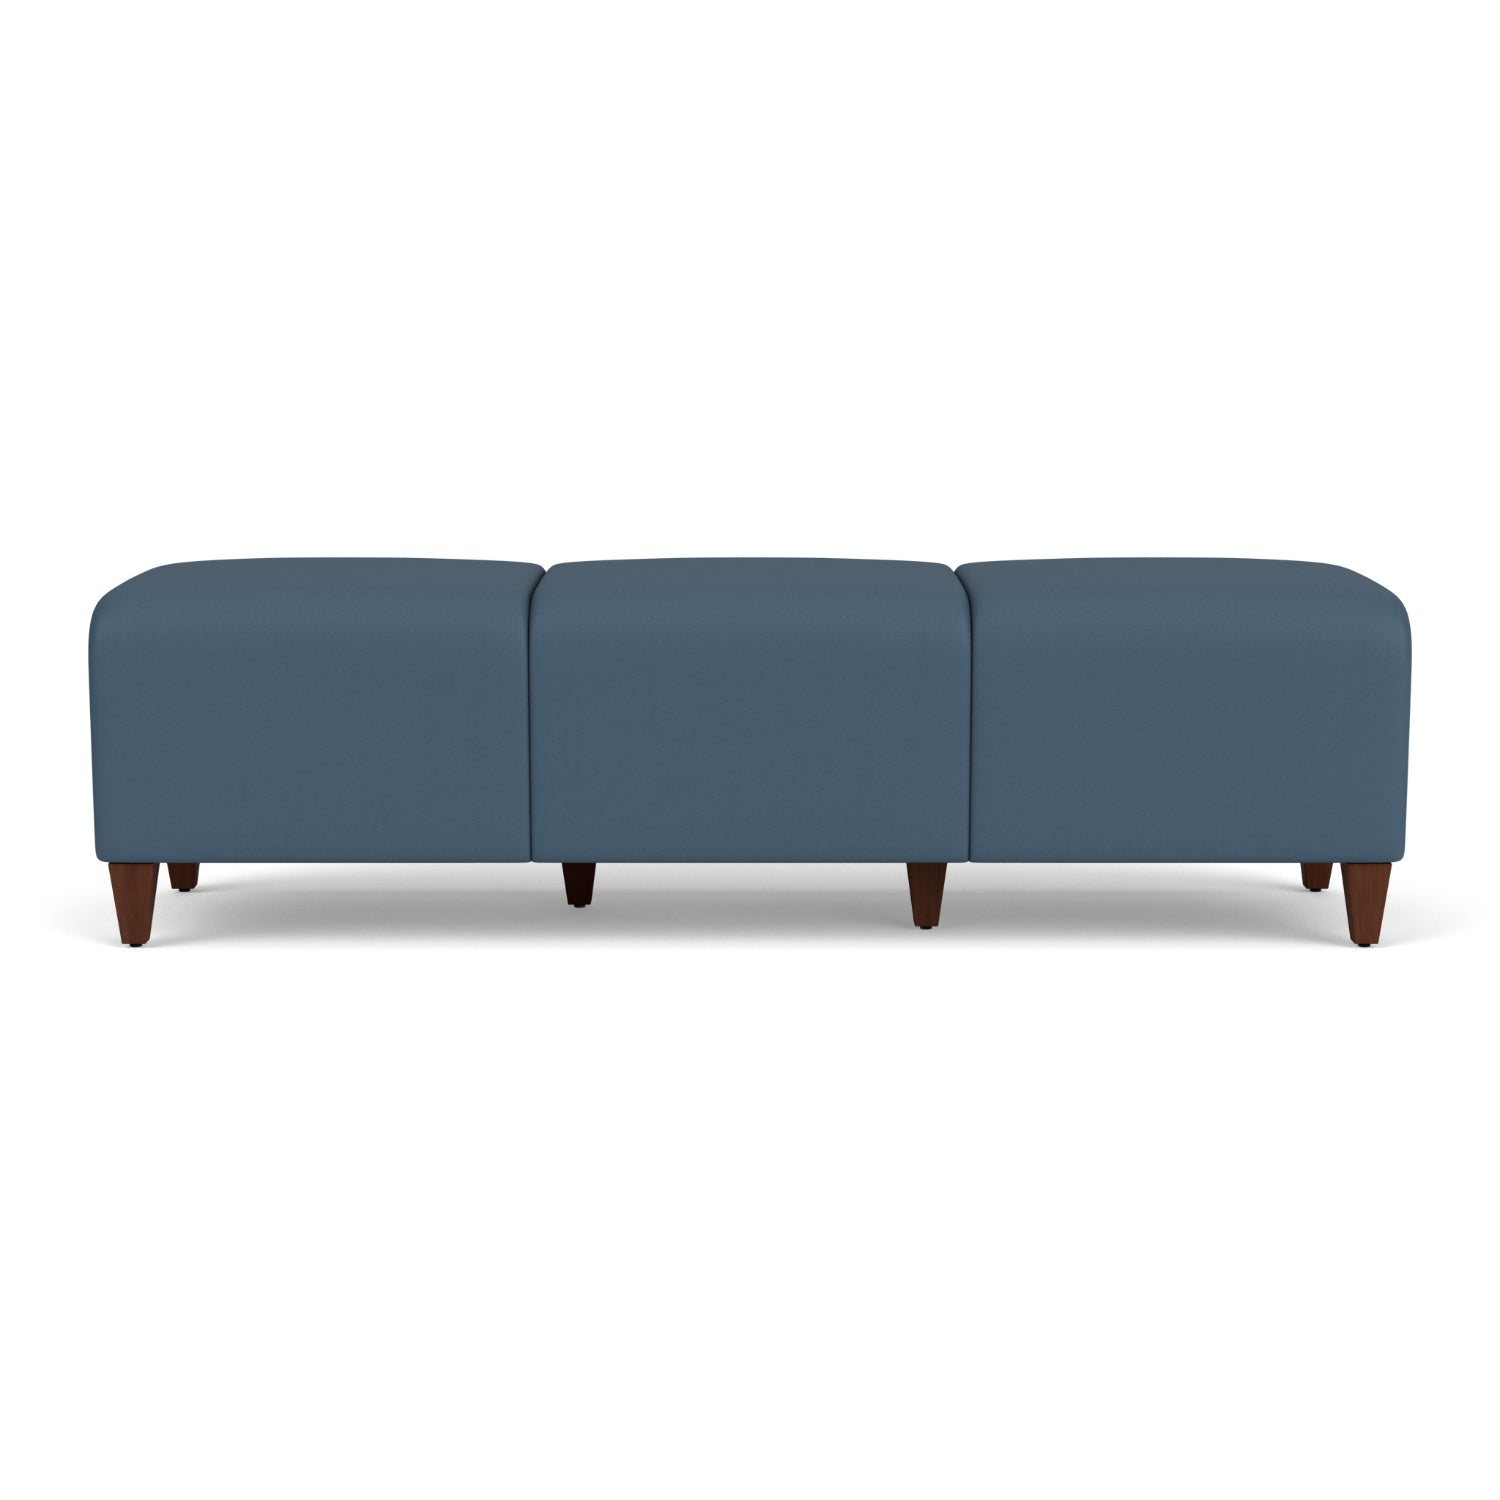 Siena Collection Reception Seating, 3-Seat Bench, Standard Vinyl Upholstery, FREE SHIPPING